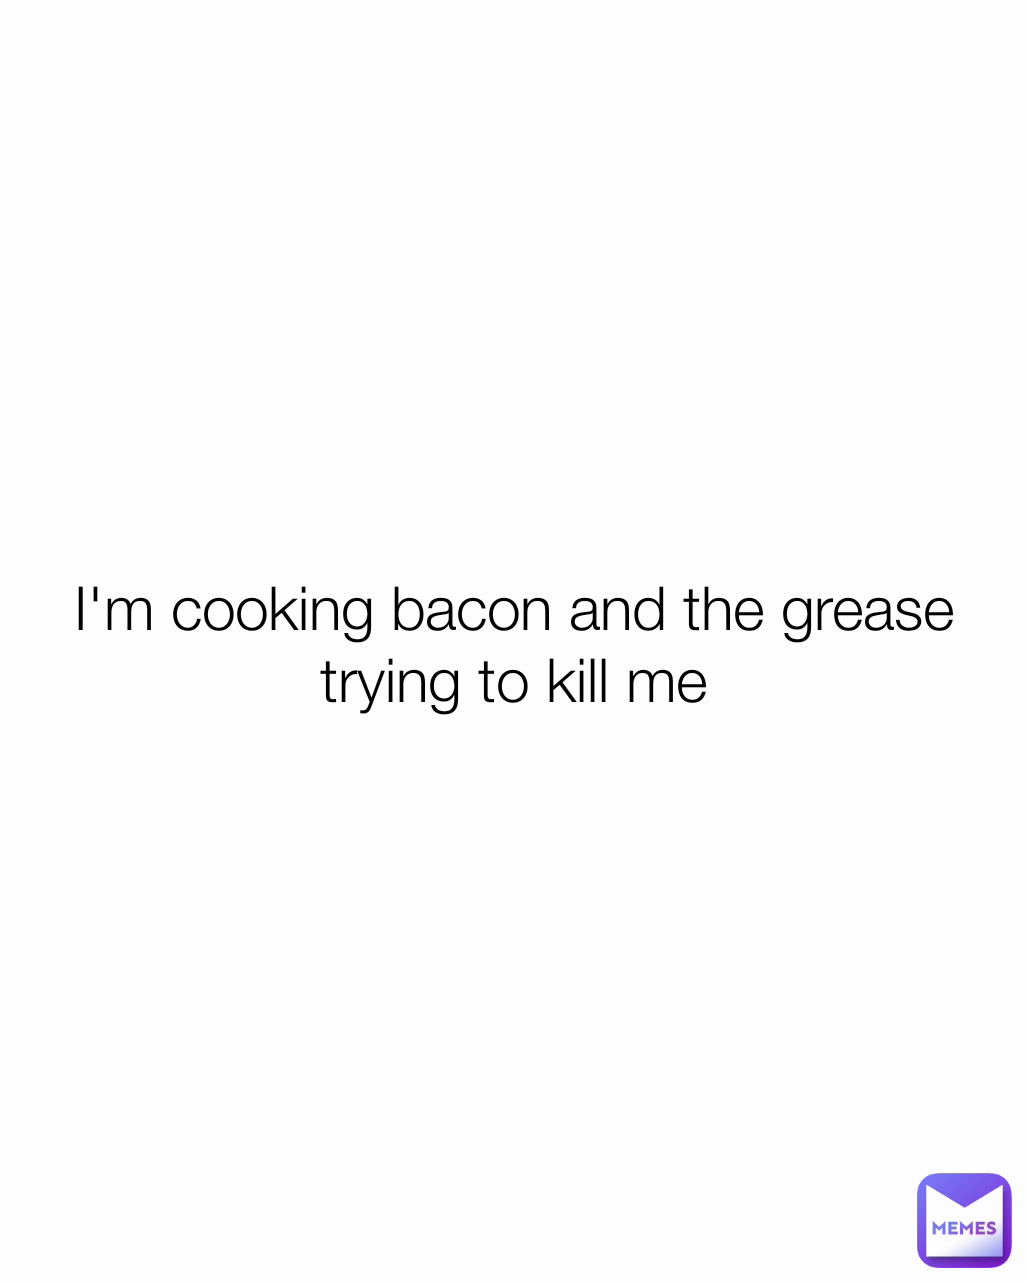 I'm cooking bacon and the grease trying to kill me